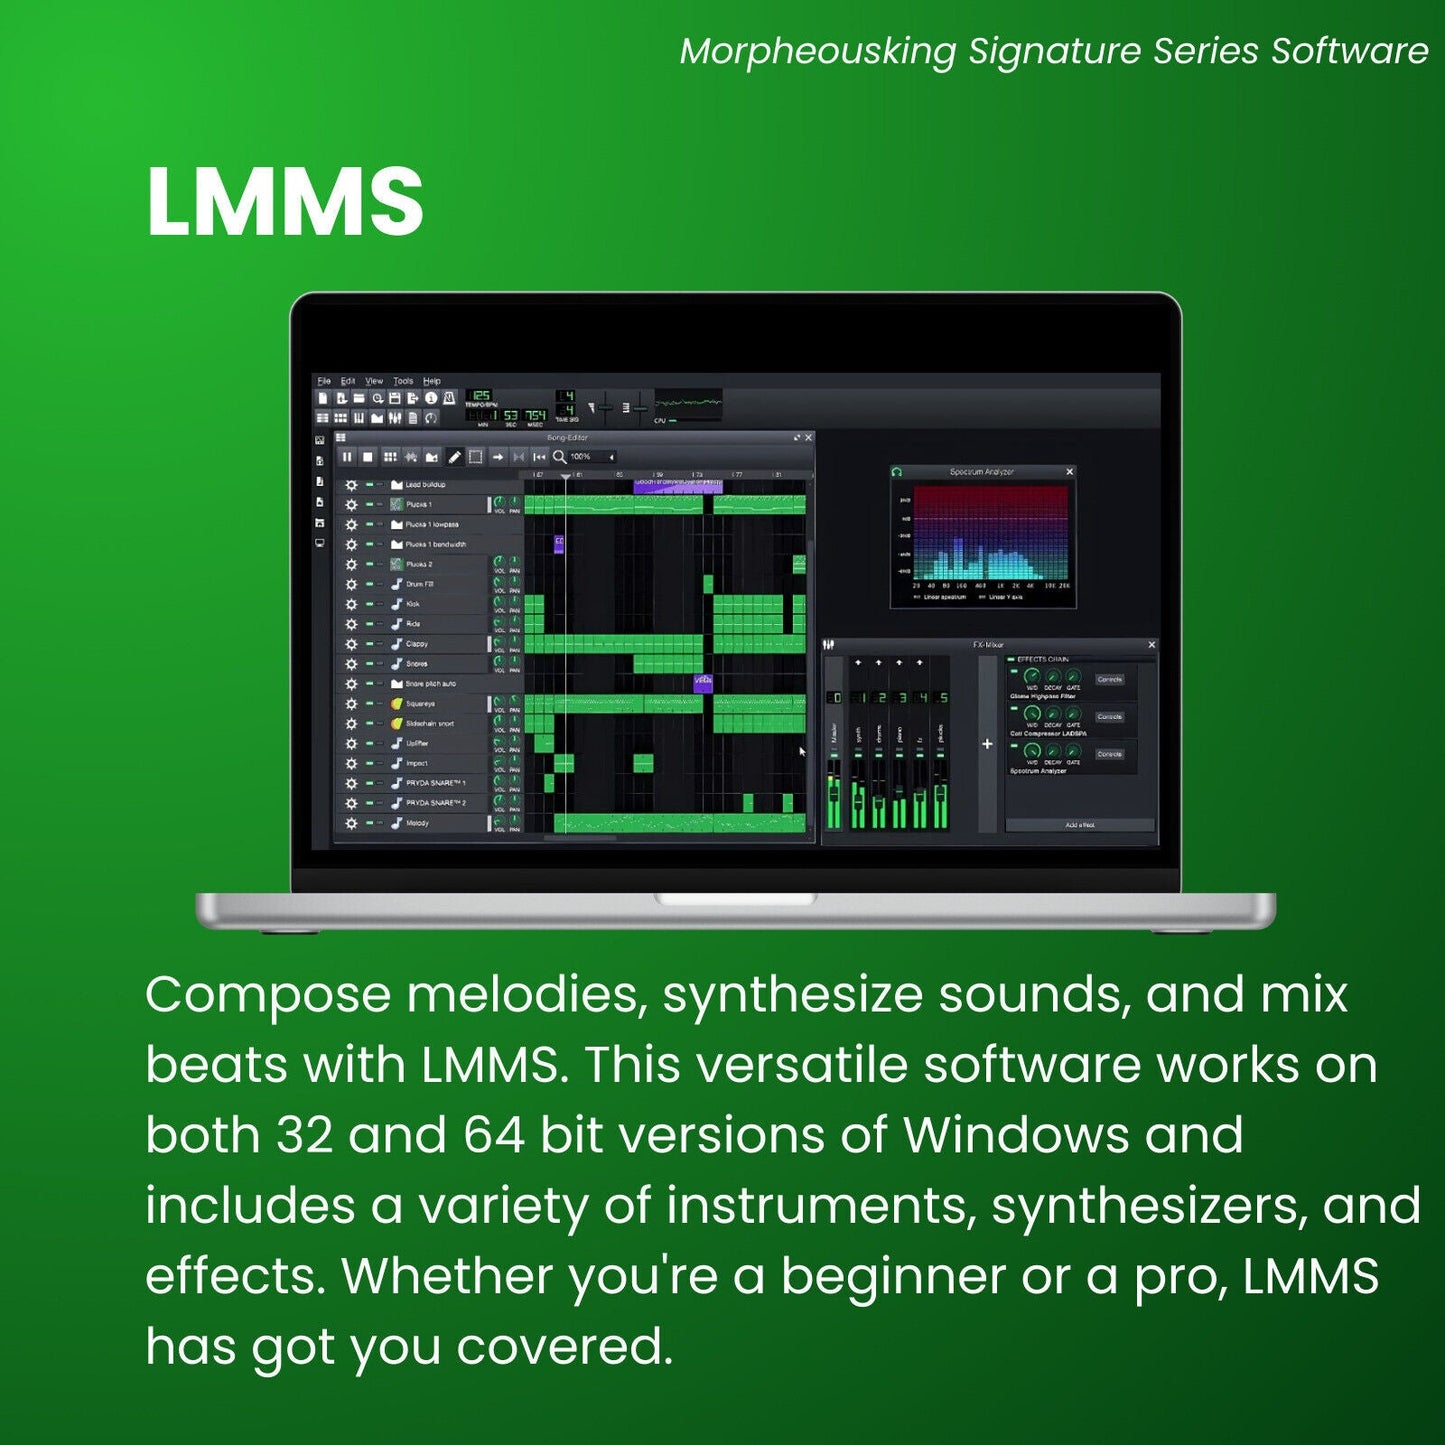 Music Studio PRO 2023- Recording, Editing, Beat Making & Production Software on USB (for Windows and Mac)